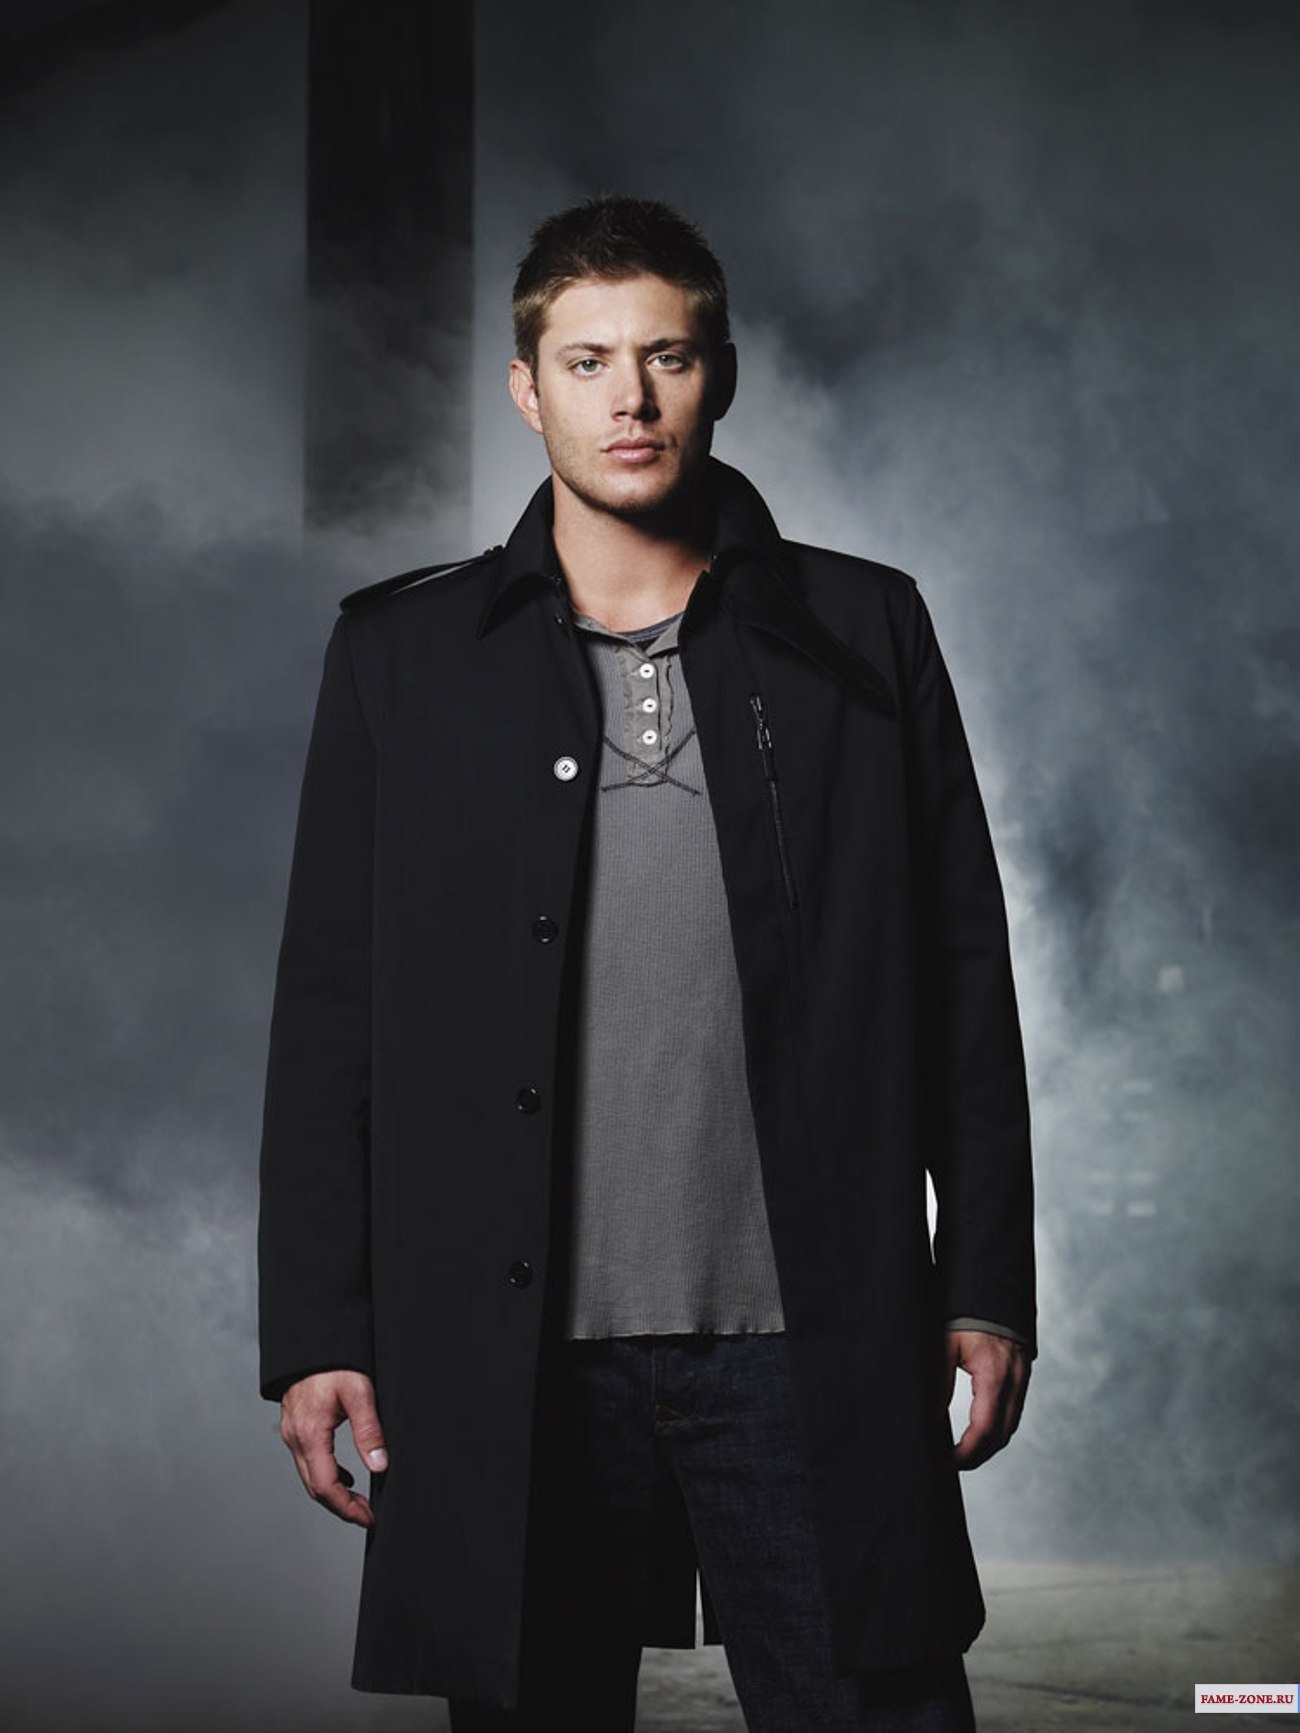 16368 Screensavers and Wallpapers Jensen Ackles for phone. Download people, actors, men, jensen ackles pictures for free